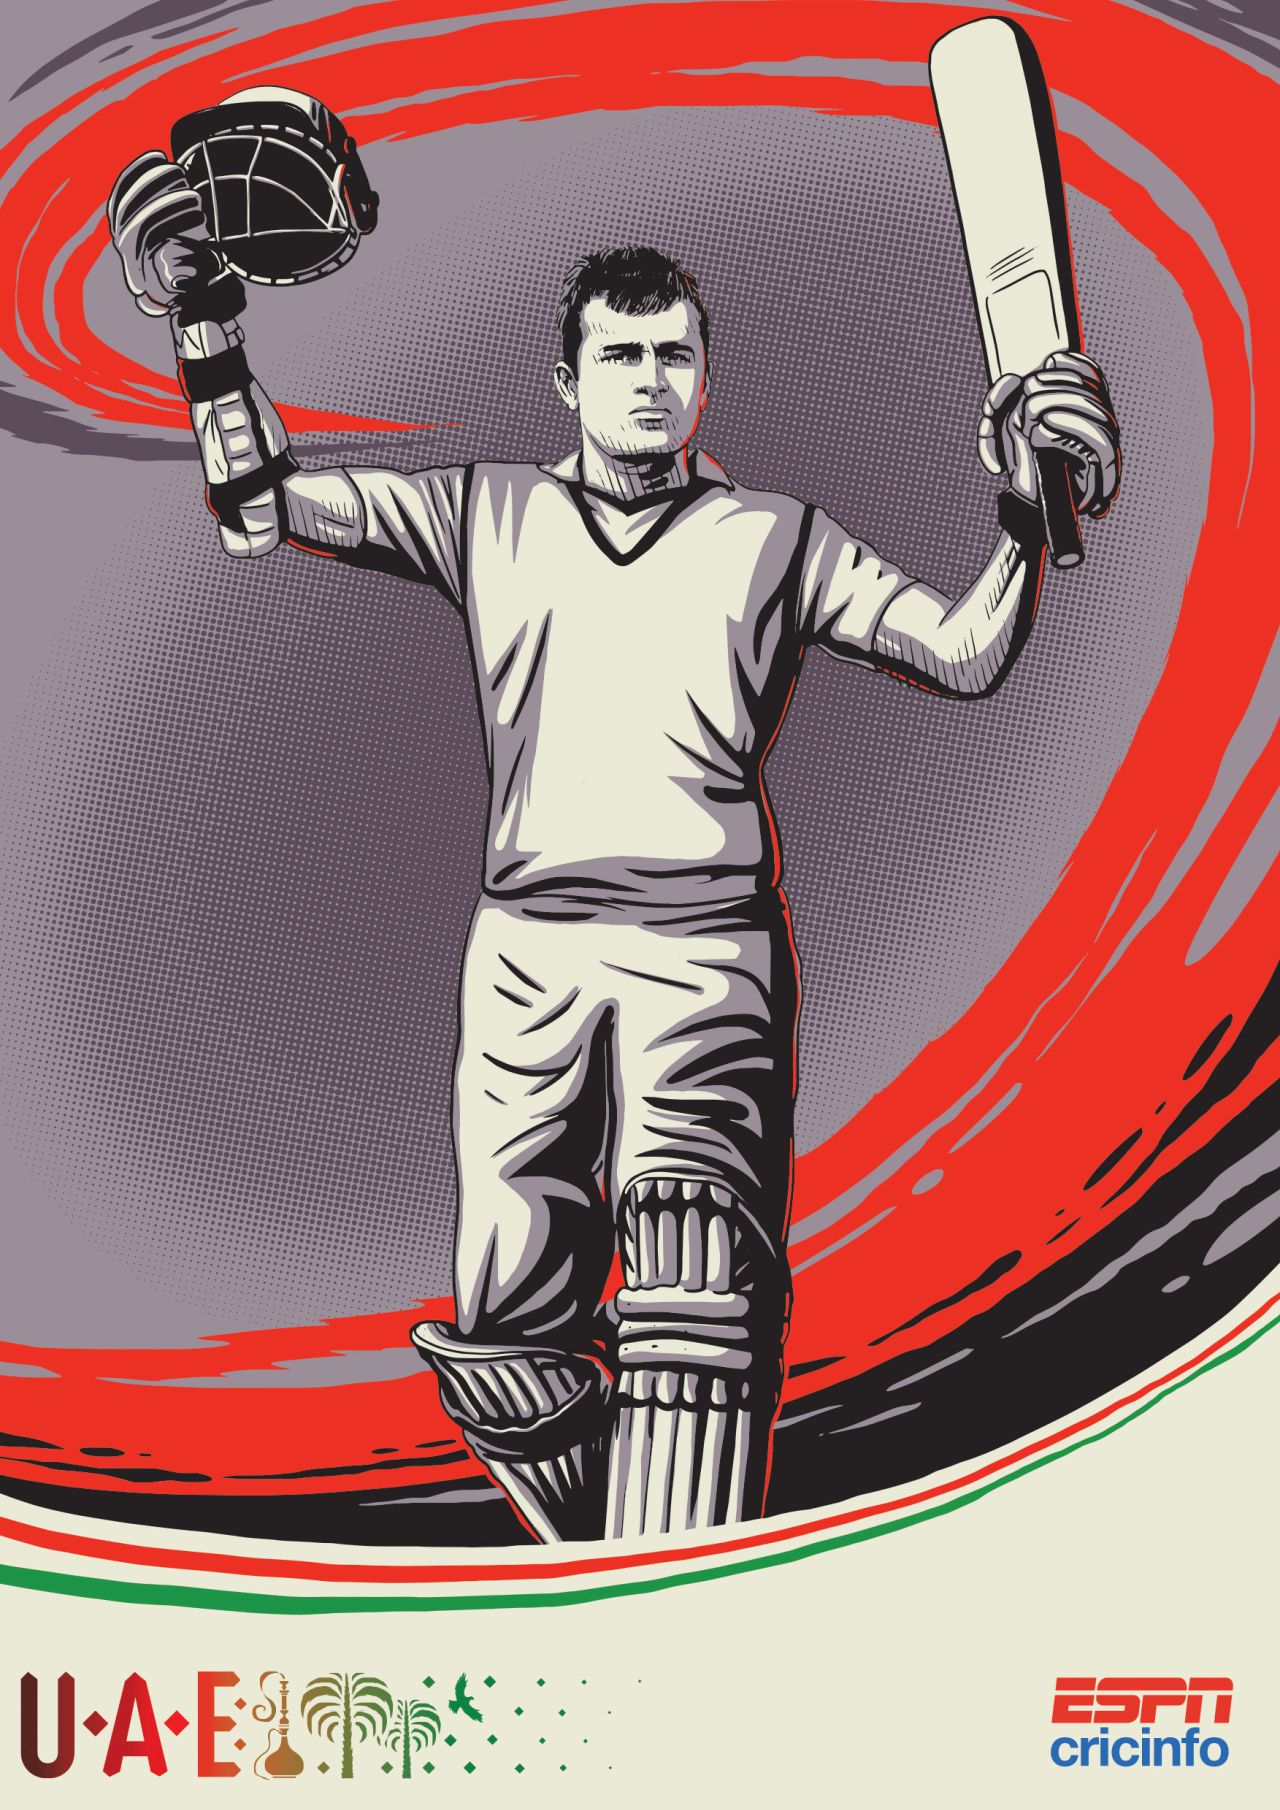 2015 World Cup posters: United Arab Emirates and Khurram Khan